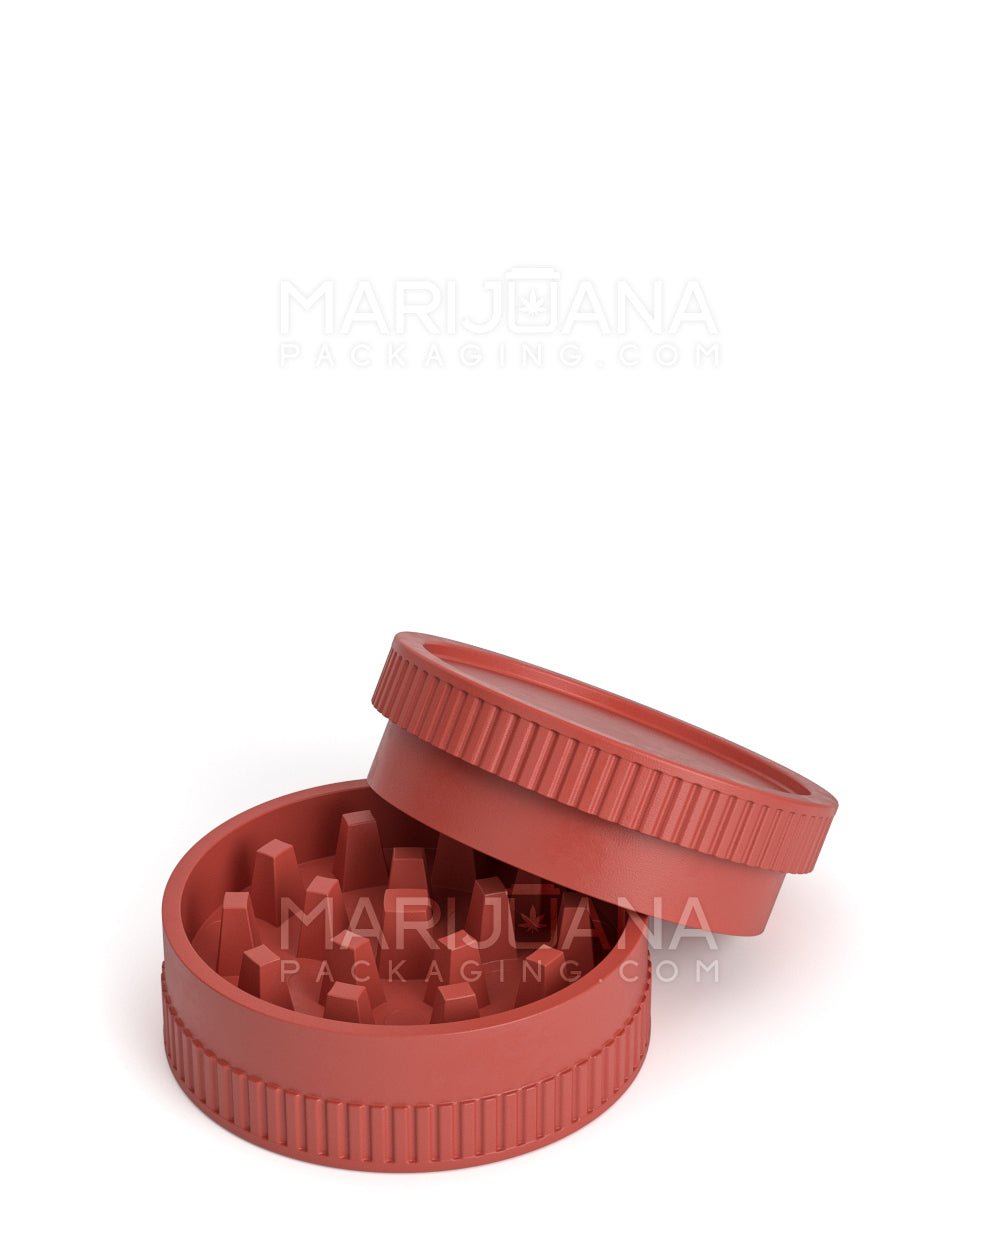 Biodegradable Thick Wall Red Grinder | 2 Piece - 55mm - 12 Count - 9